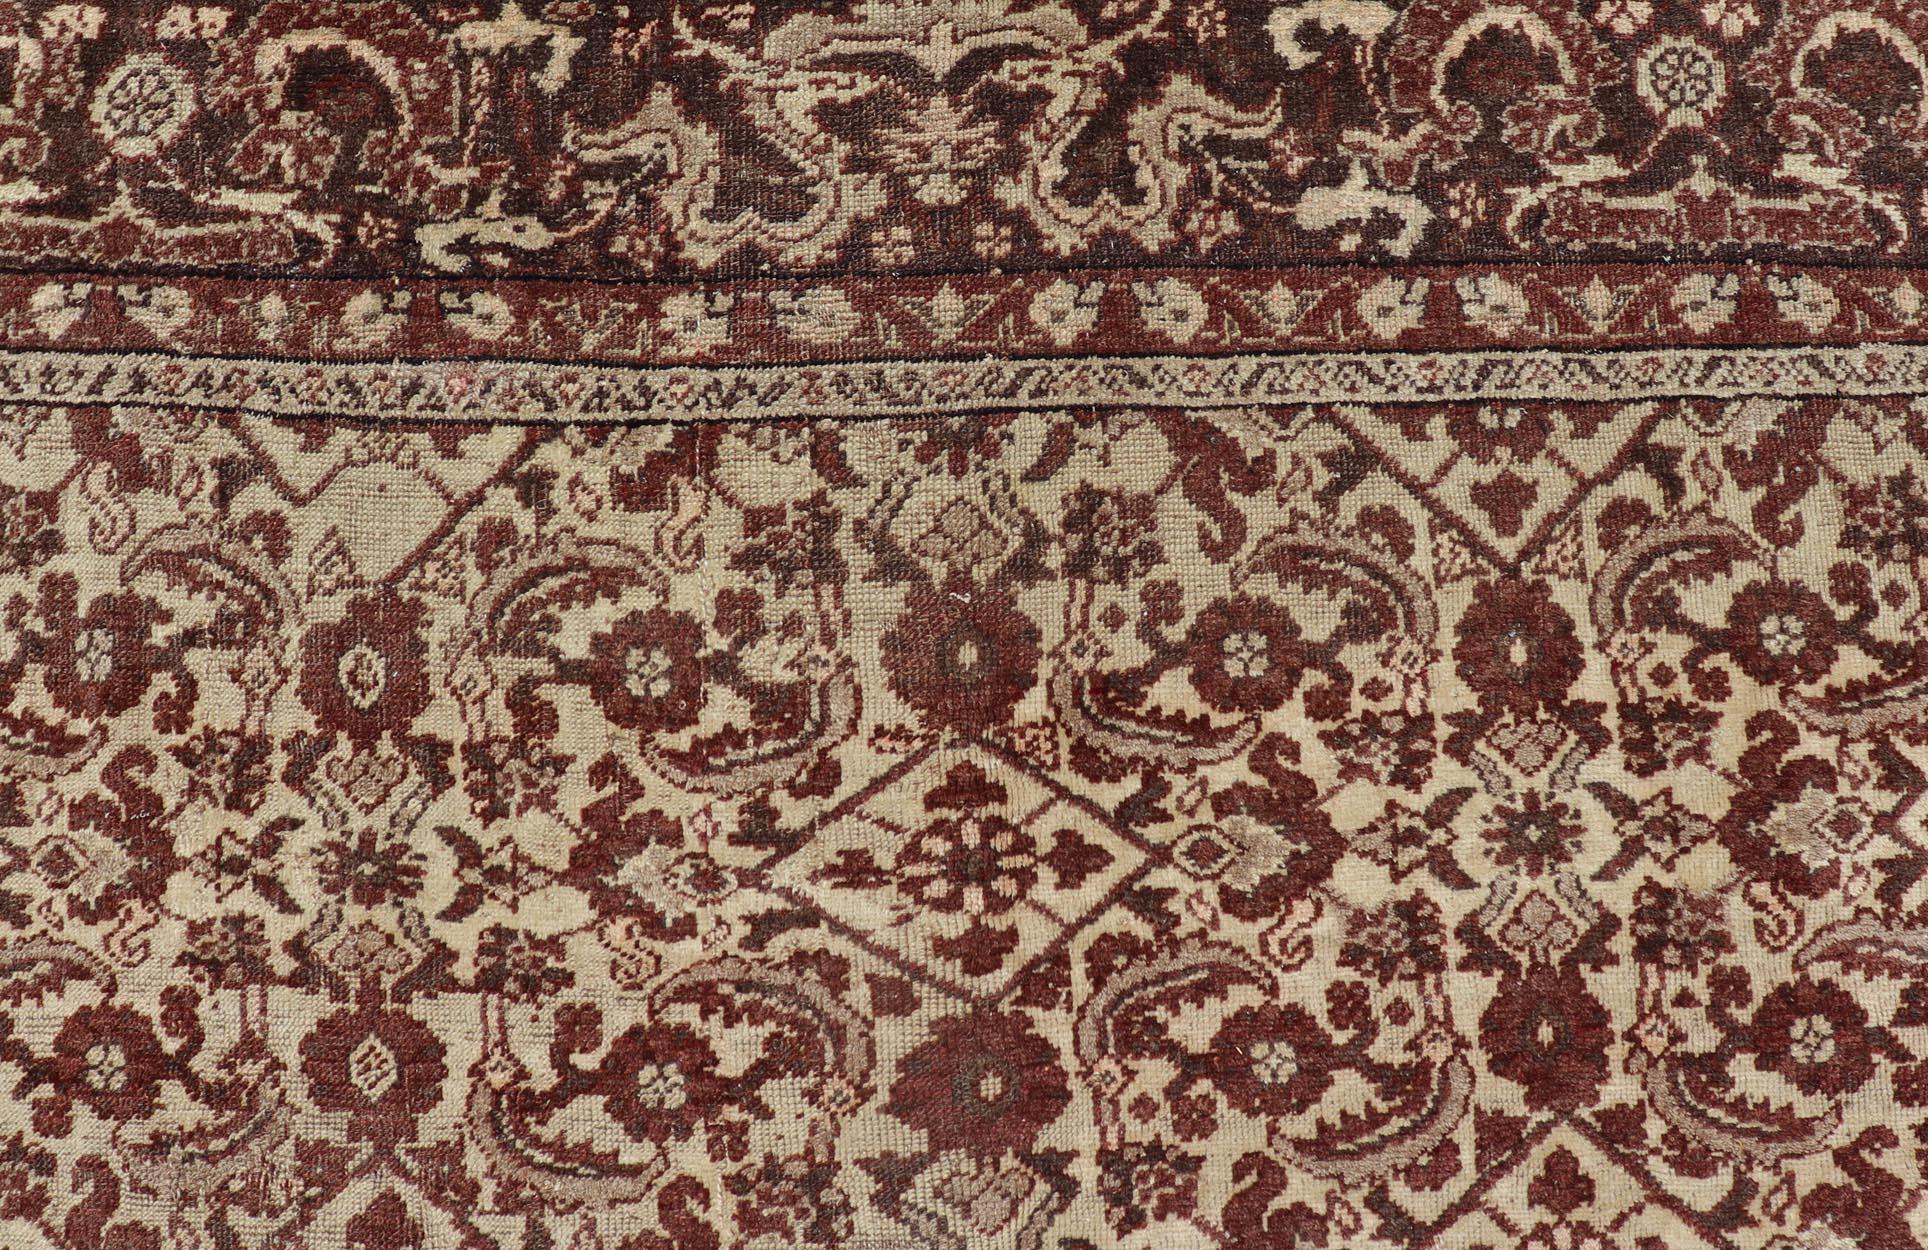 Antique Turkish Sivas Rug with Tan Background and Maroon, Eggplant, Brown Color  For Sale 3